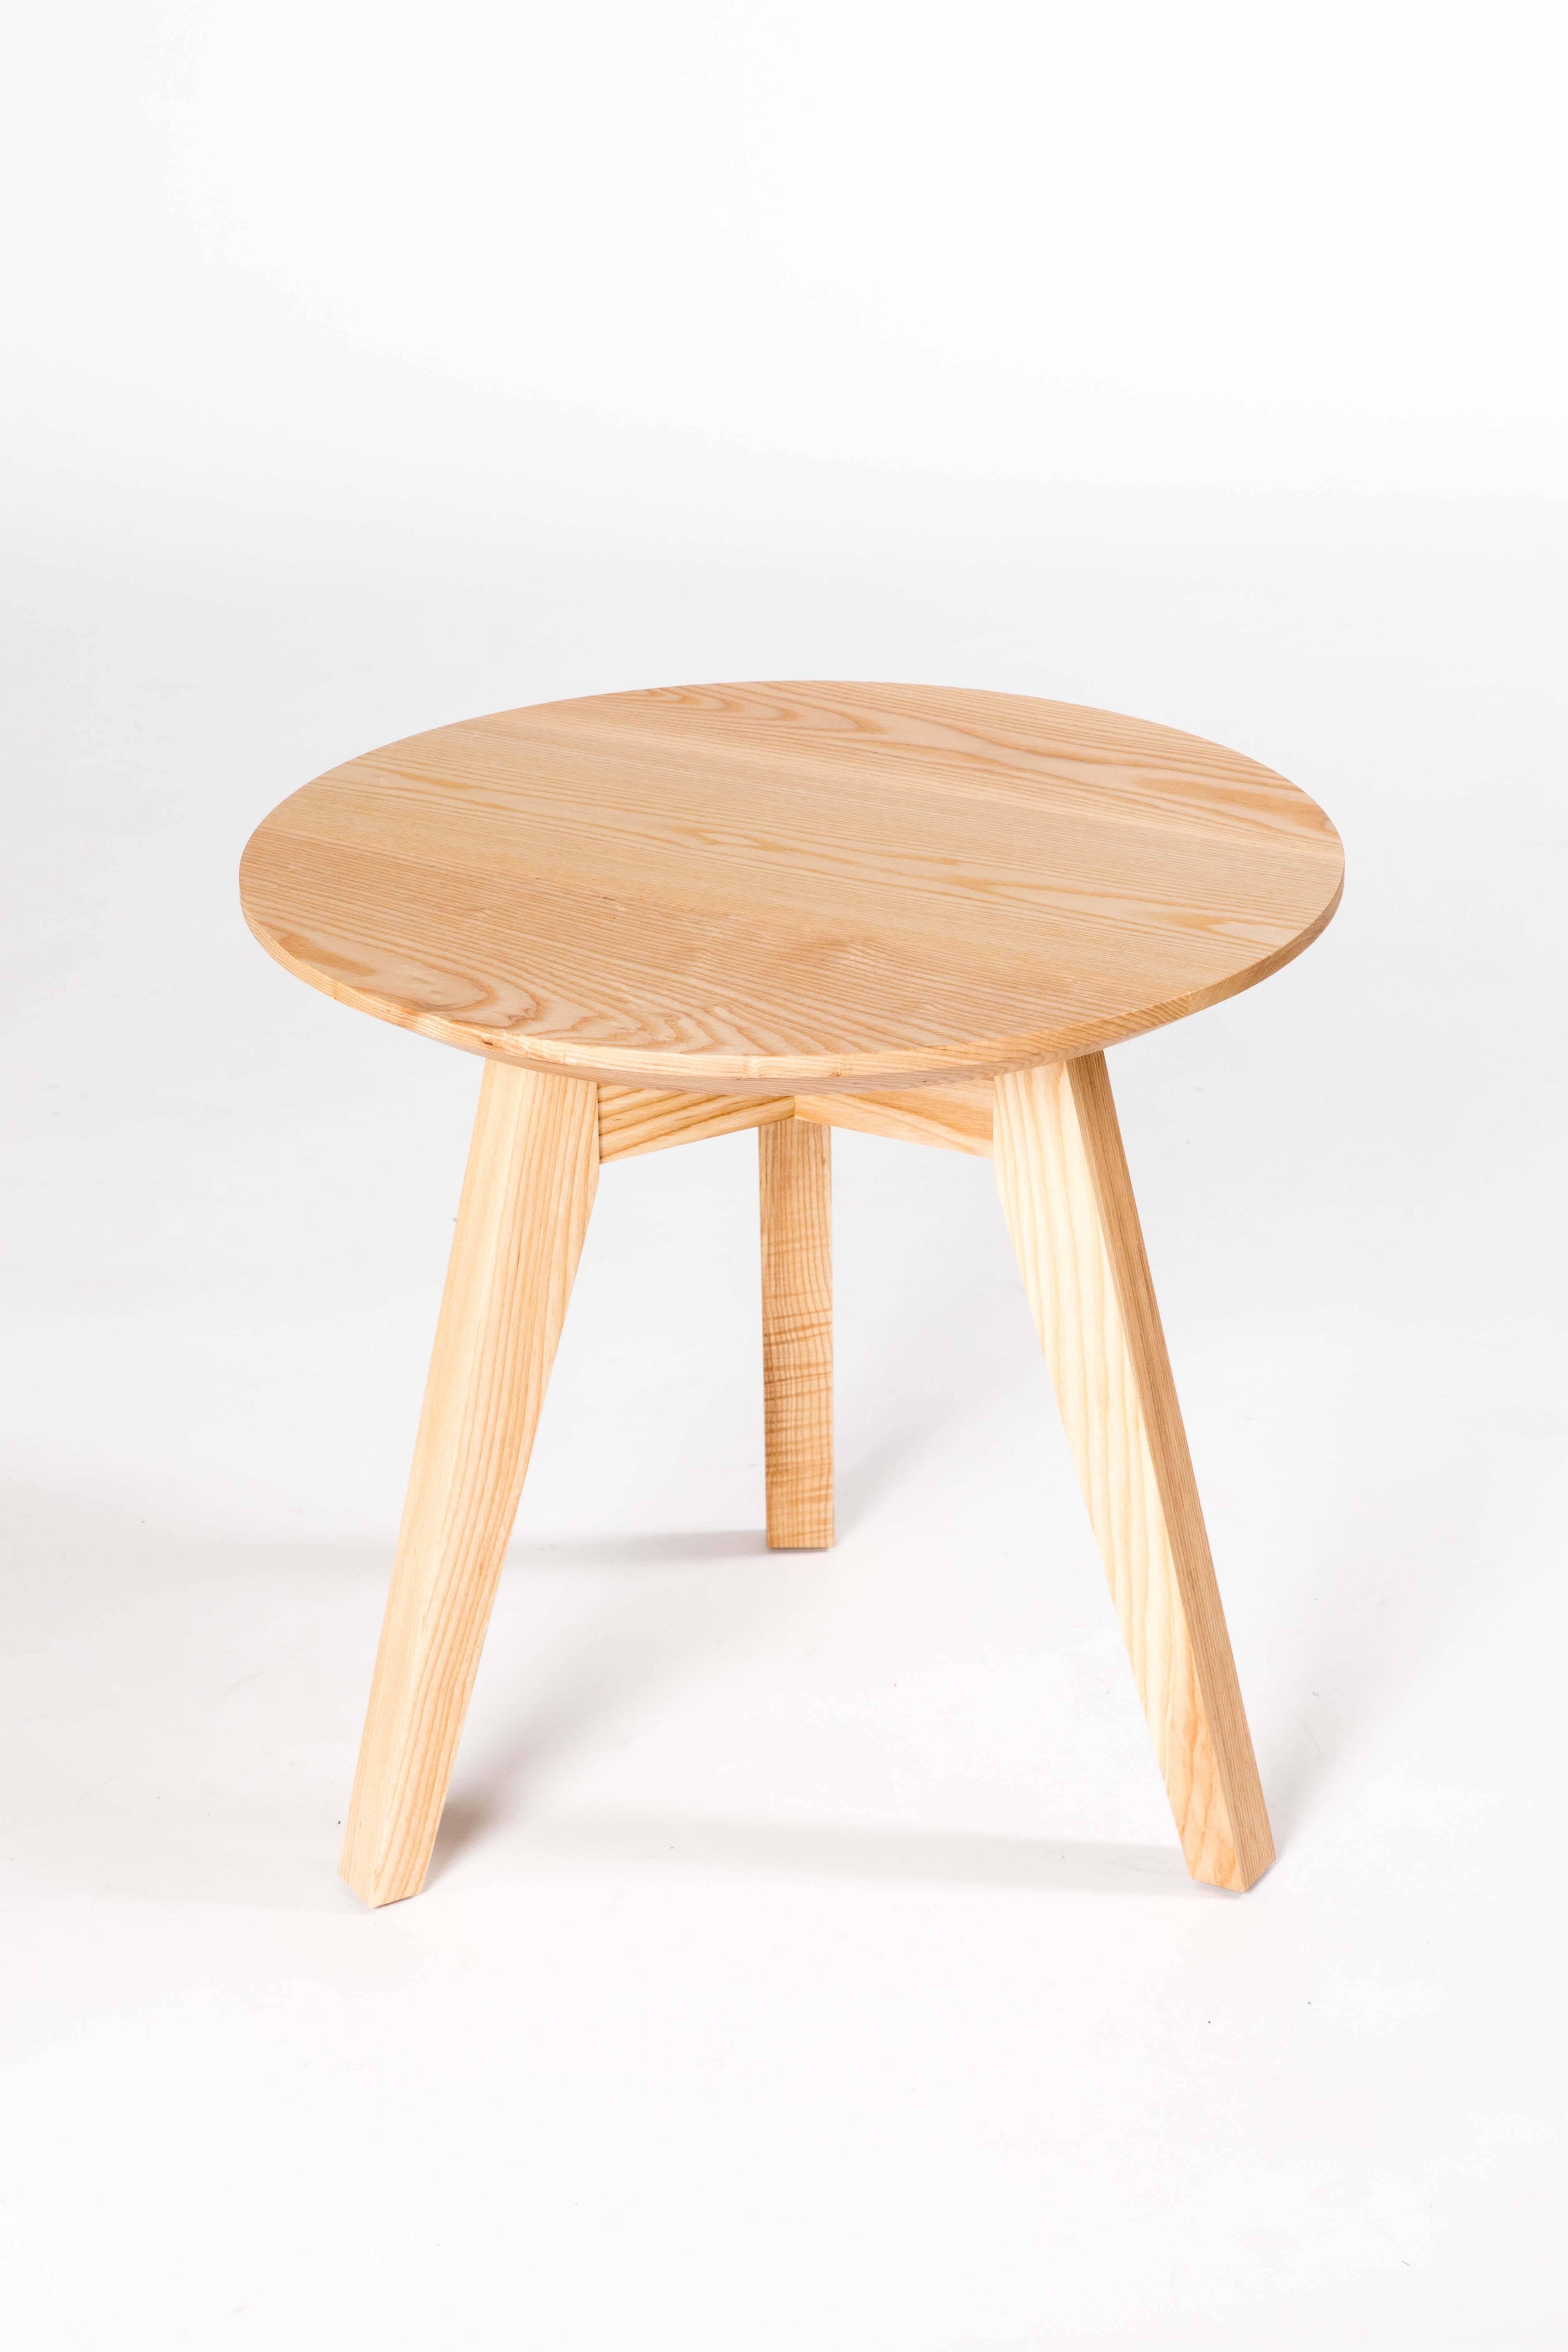 Each table in the occasional table series by Kate Duncan is designed with tapered legs and bevelled top which give the piece a distinct lightness that works well in a variety of settings. Rather than using a bulky skirt that wraps around the